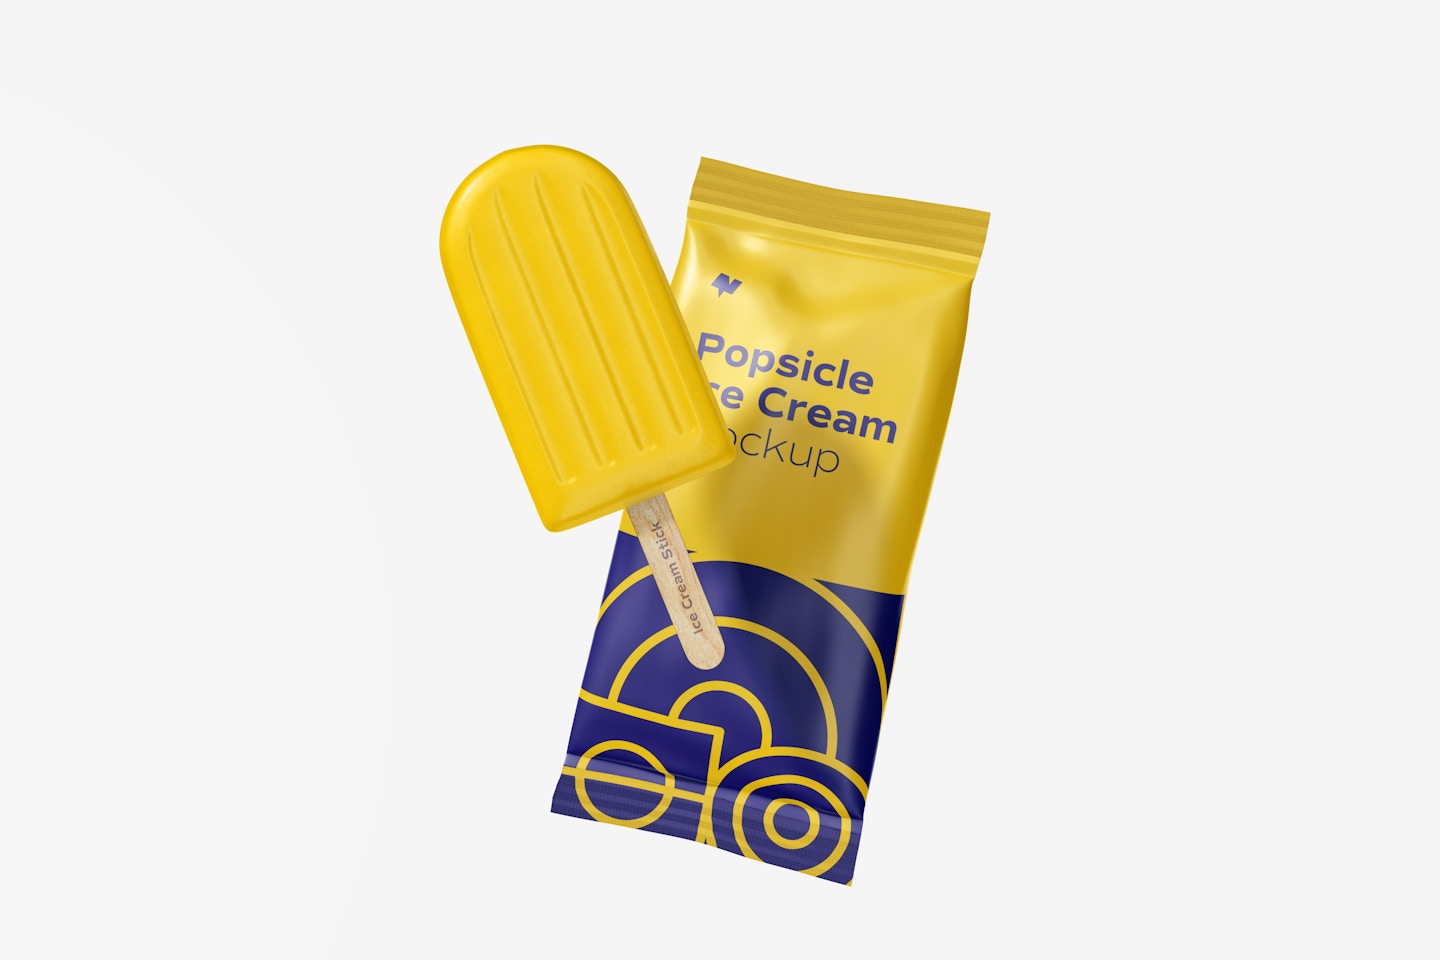 Popsicle Ice Cream Packaging Mockup, Floating